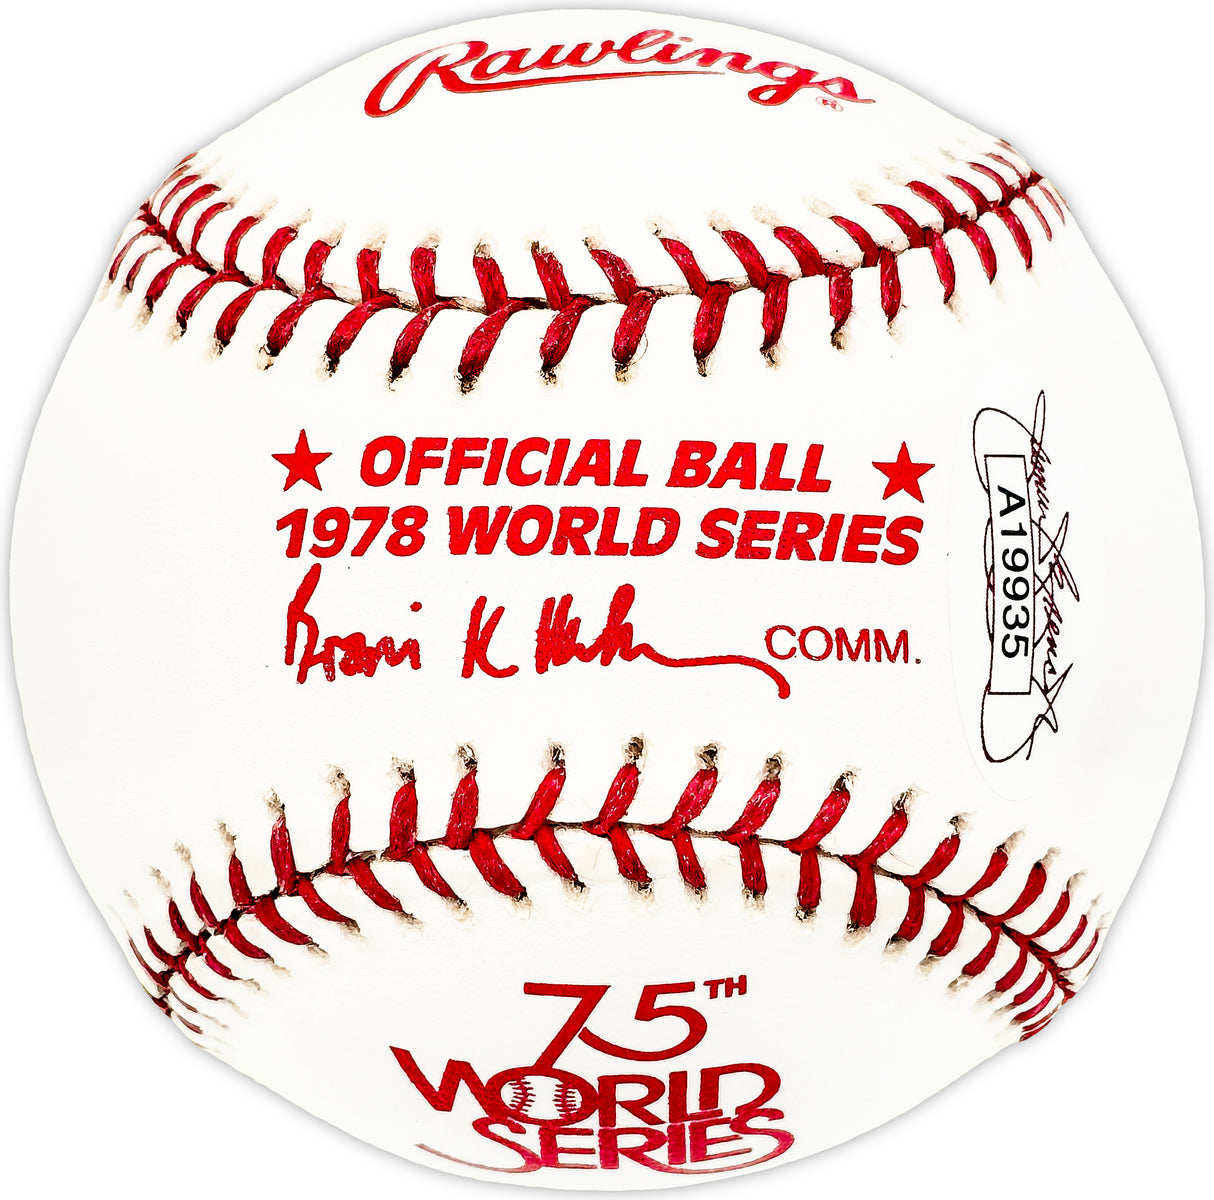 Goose Gossage Autographed Official 1978 World Series Logo MLB Baseball New York Yankees "1978 WS Champs" JSA #A19935